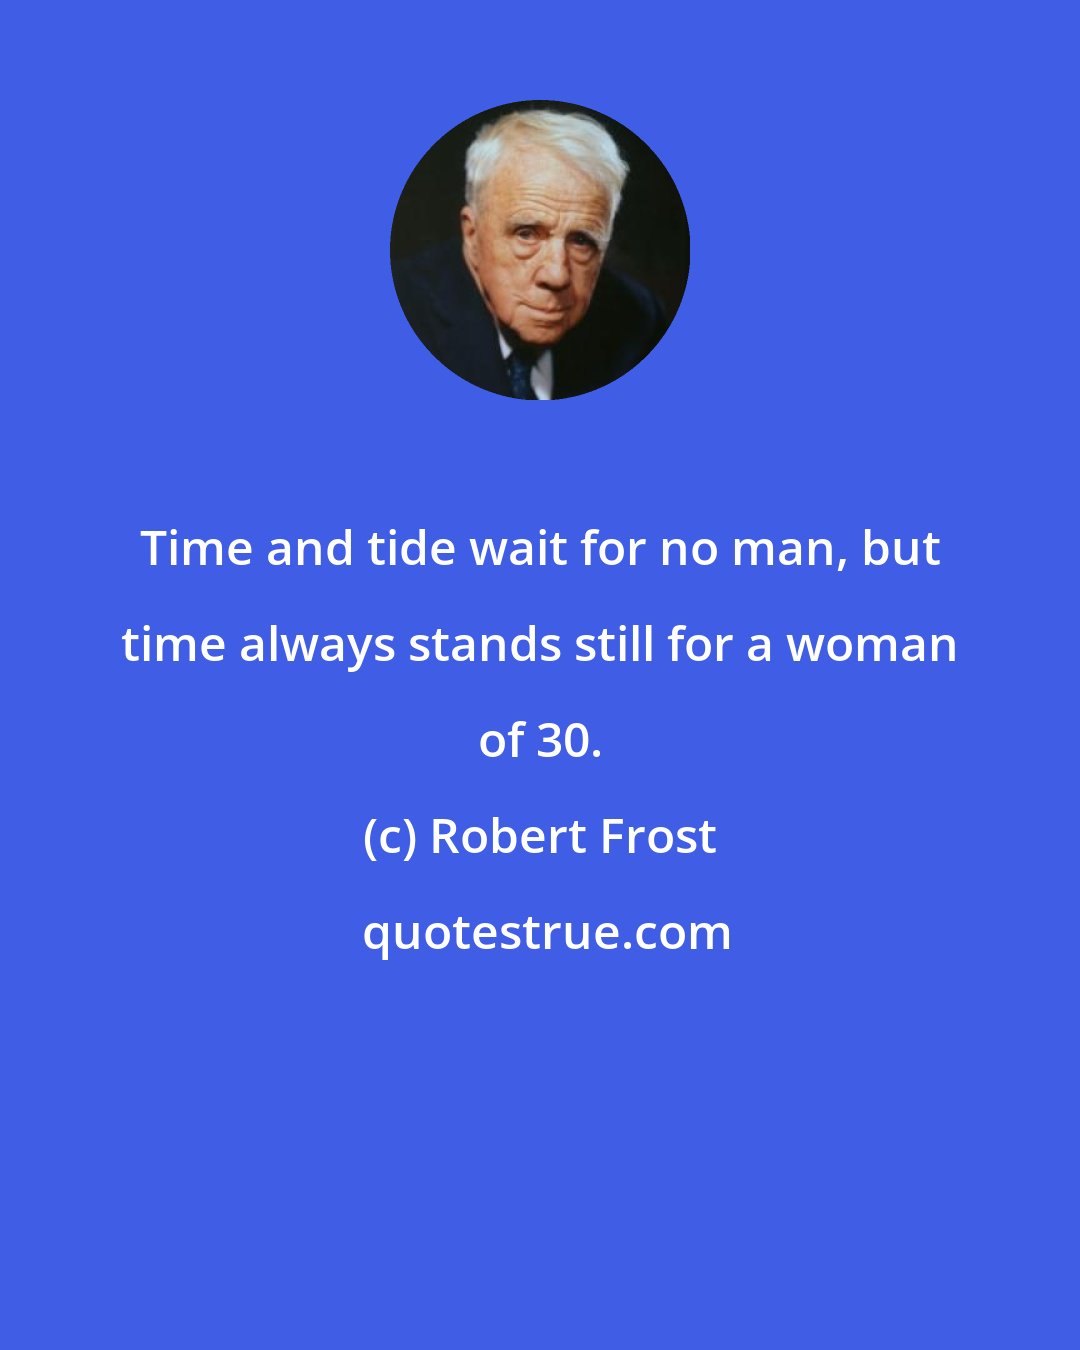 Robert Frost: Time and tide wait for no man, but time always stands still for a woman of 30.